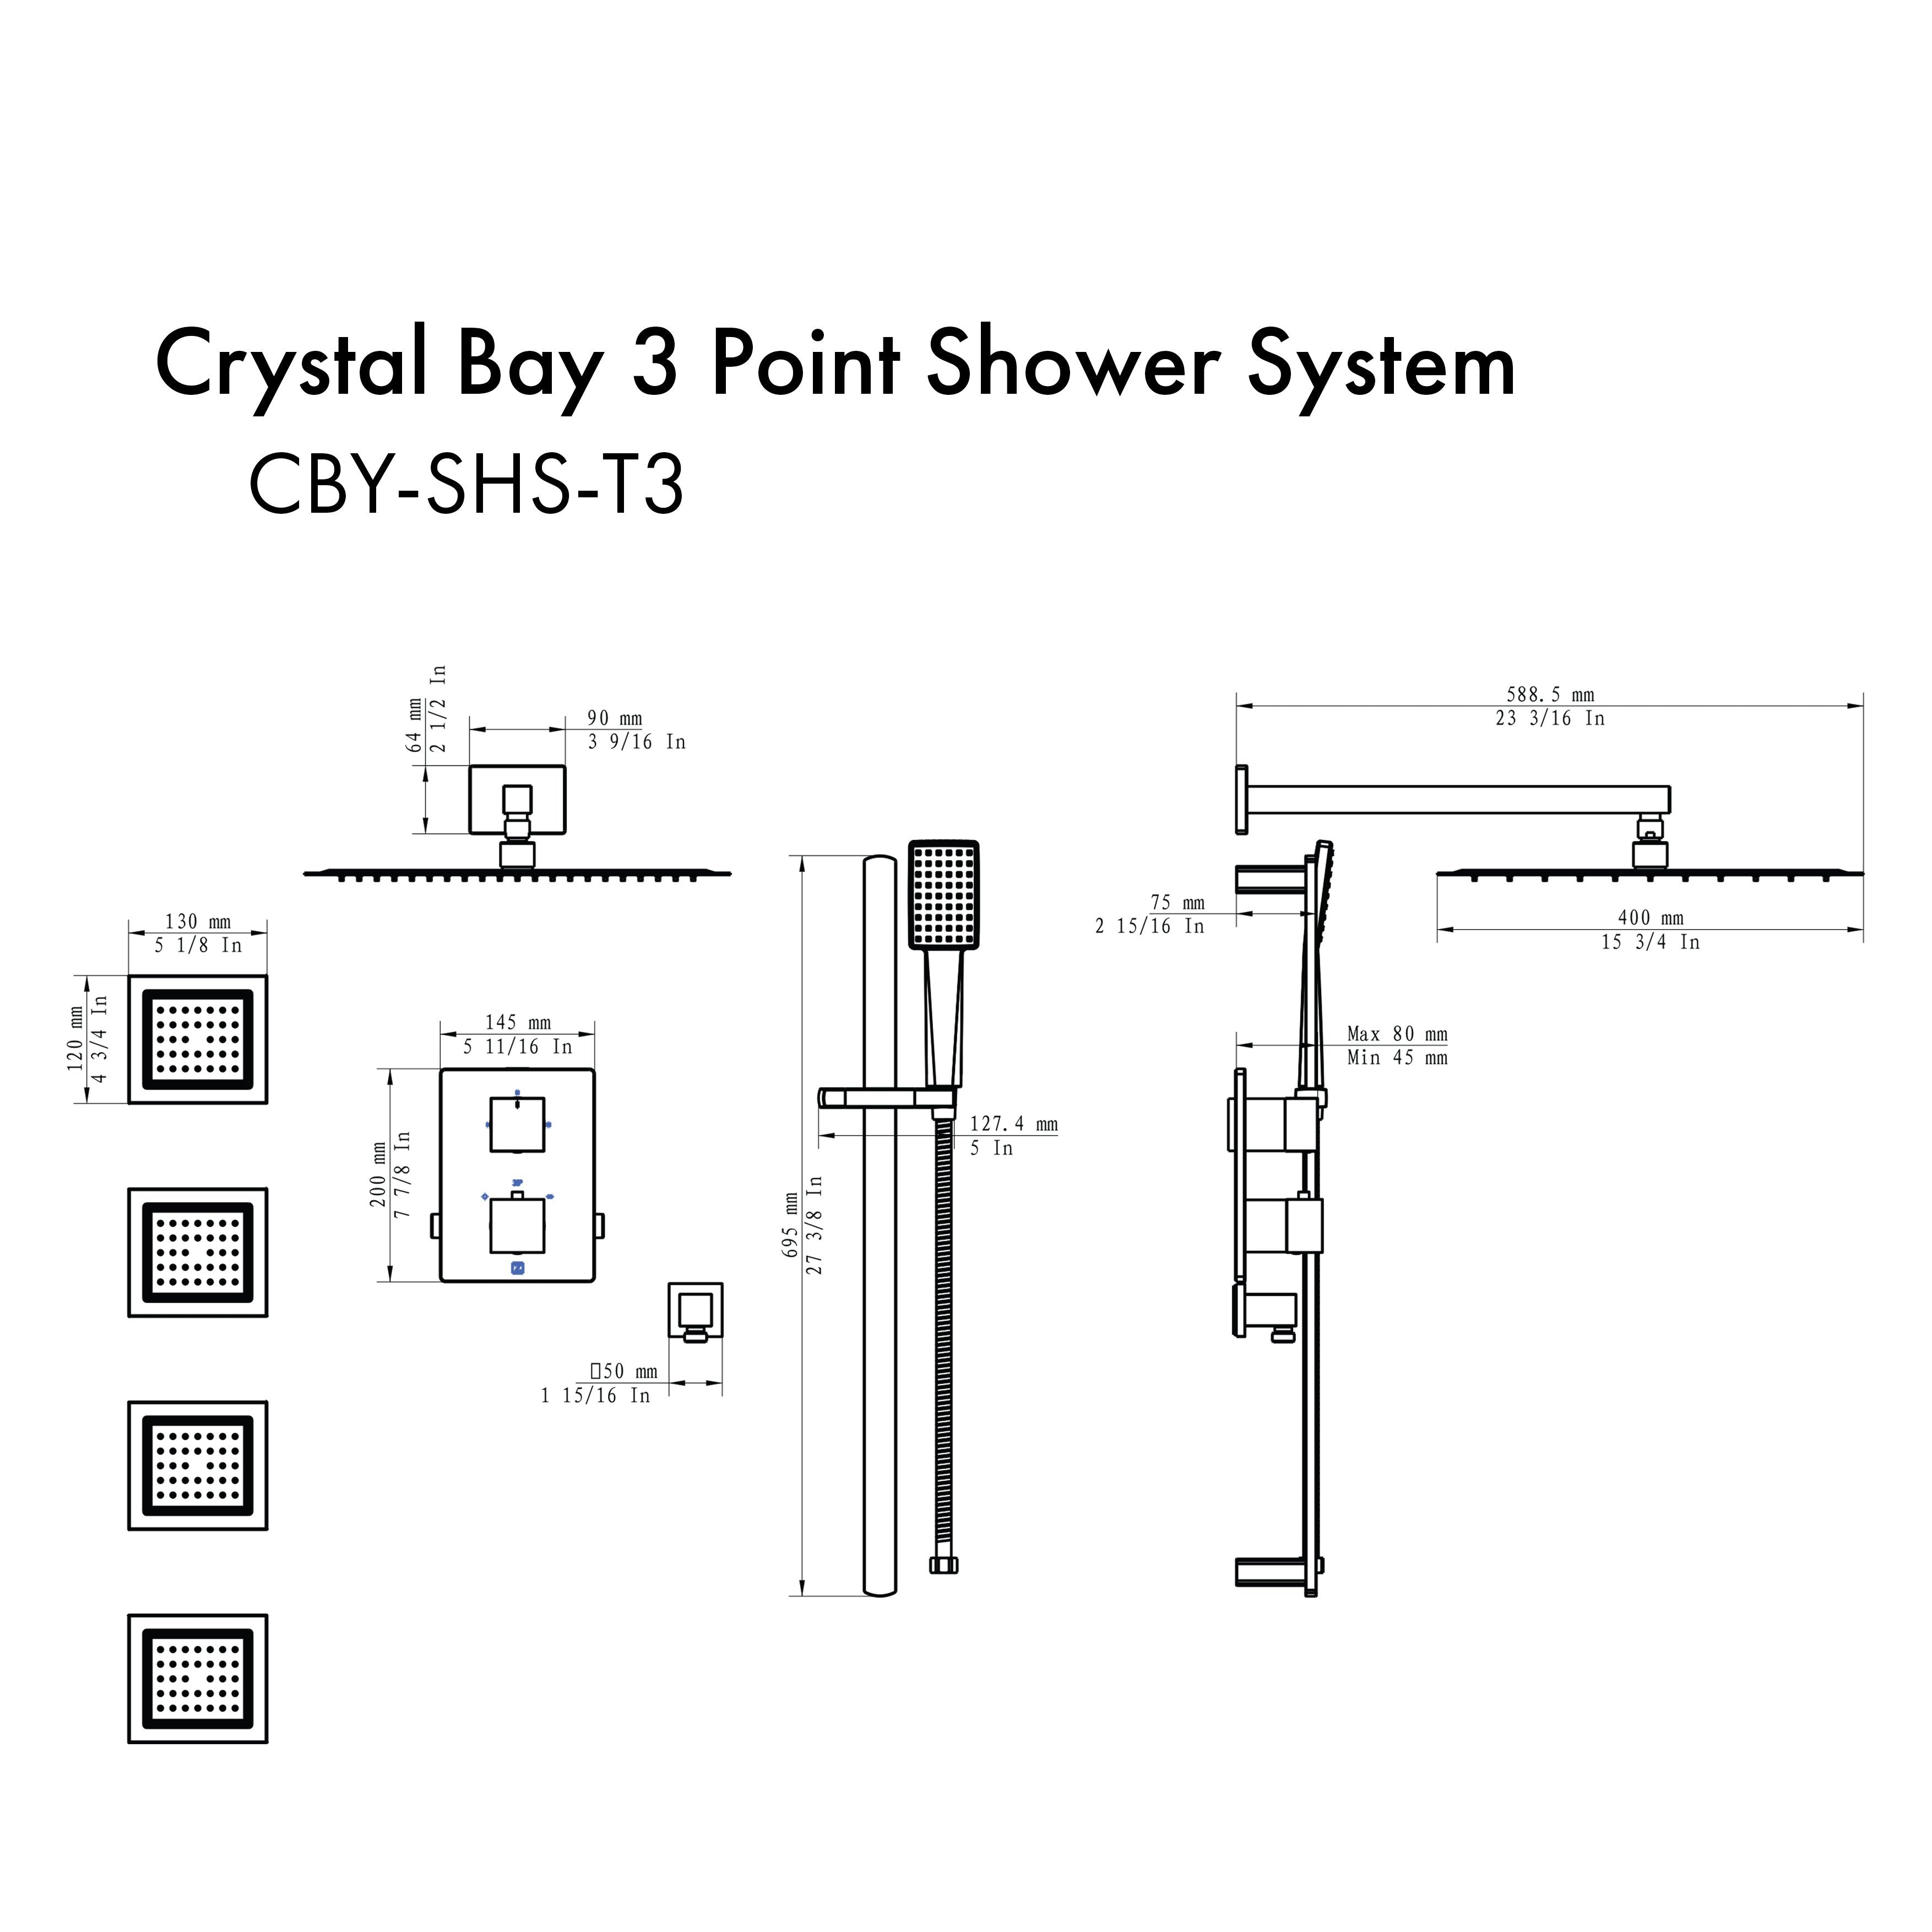 Therangehoodstore.com, ZLINE Crystal Bay Thermostatic Shower System with Body Jets, color options available (CBY-SHS-T3), CBY-SHS-T3-BN,